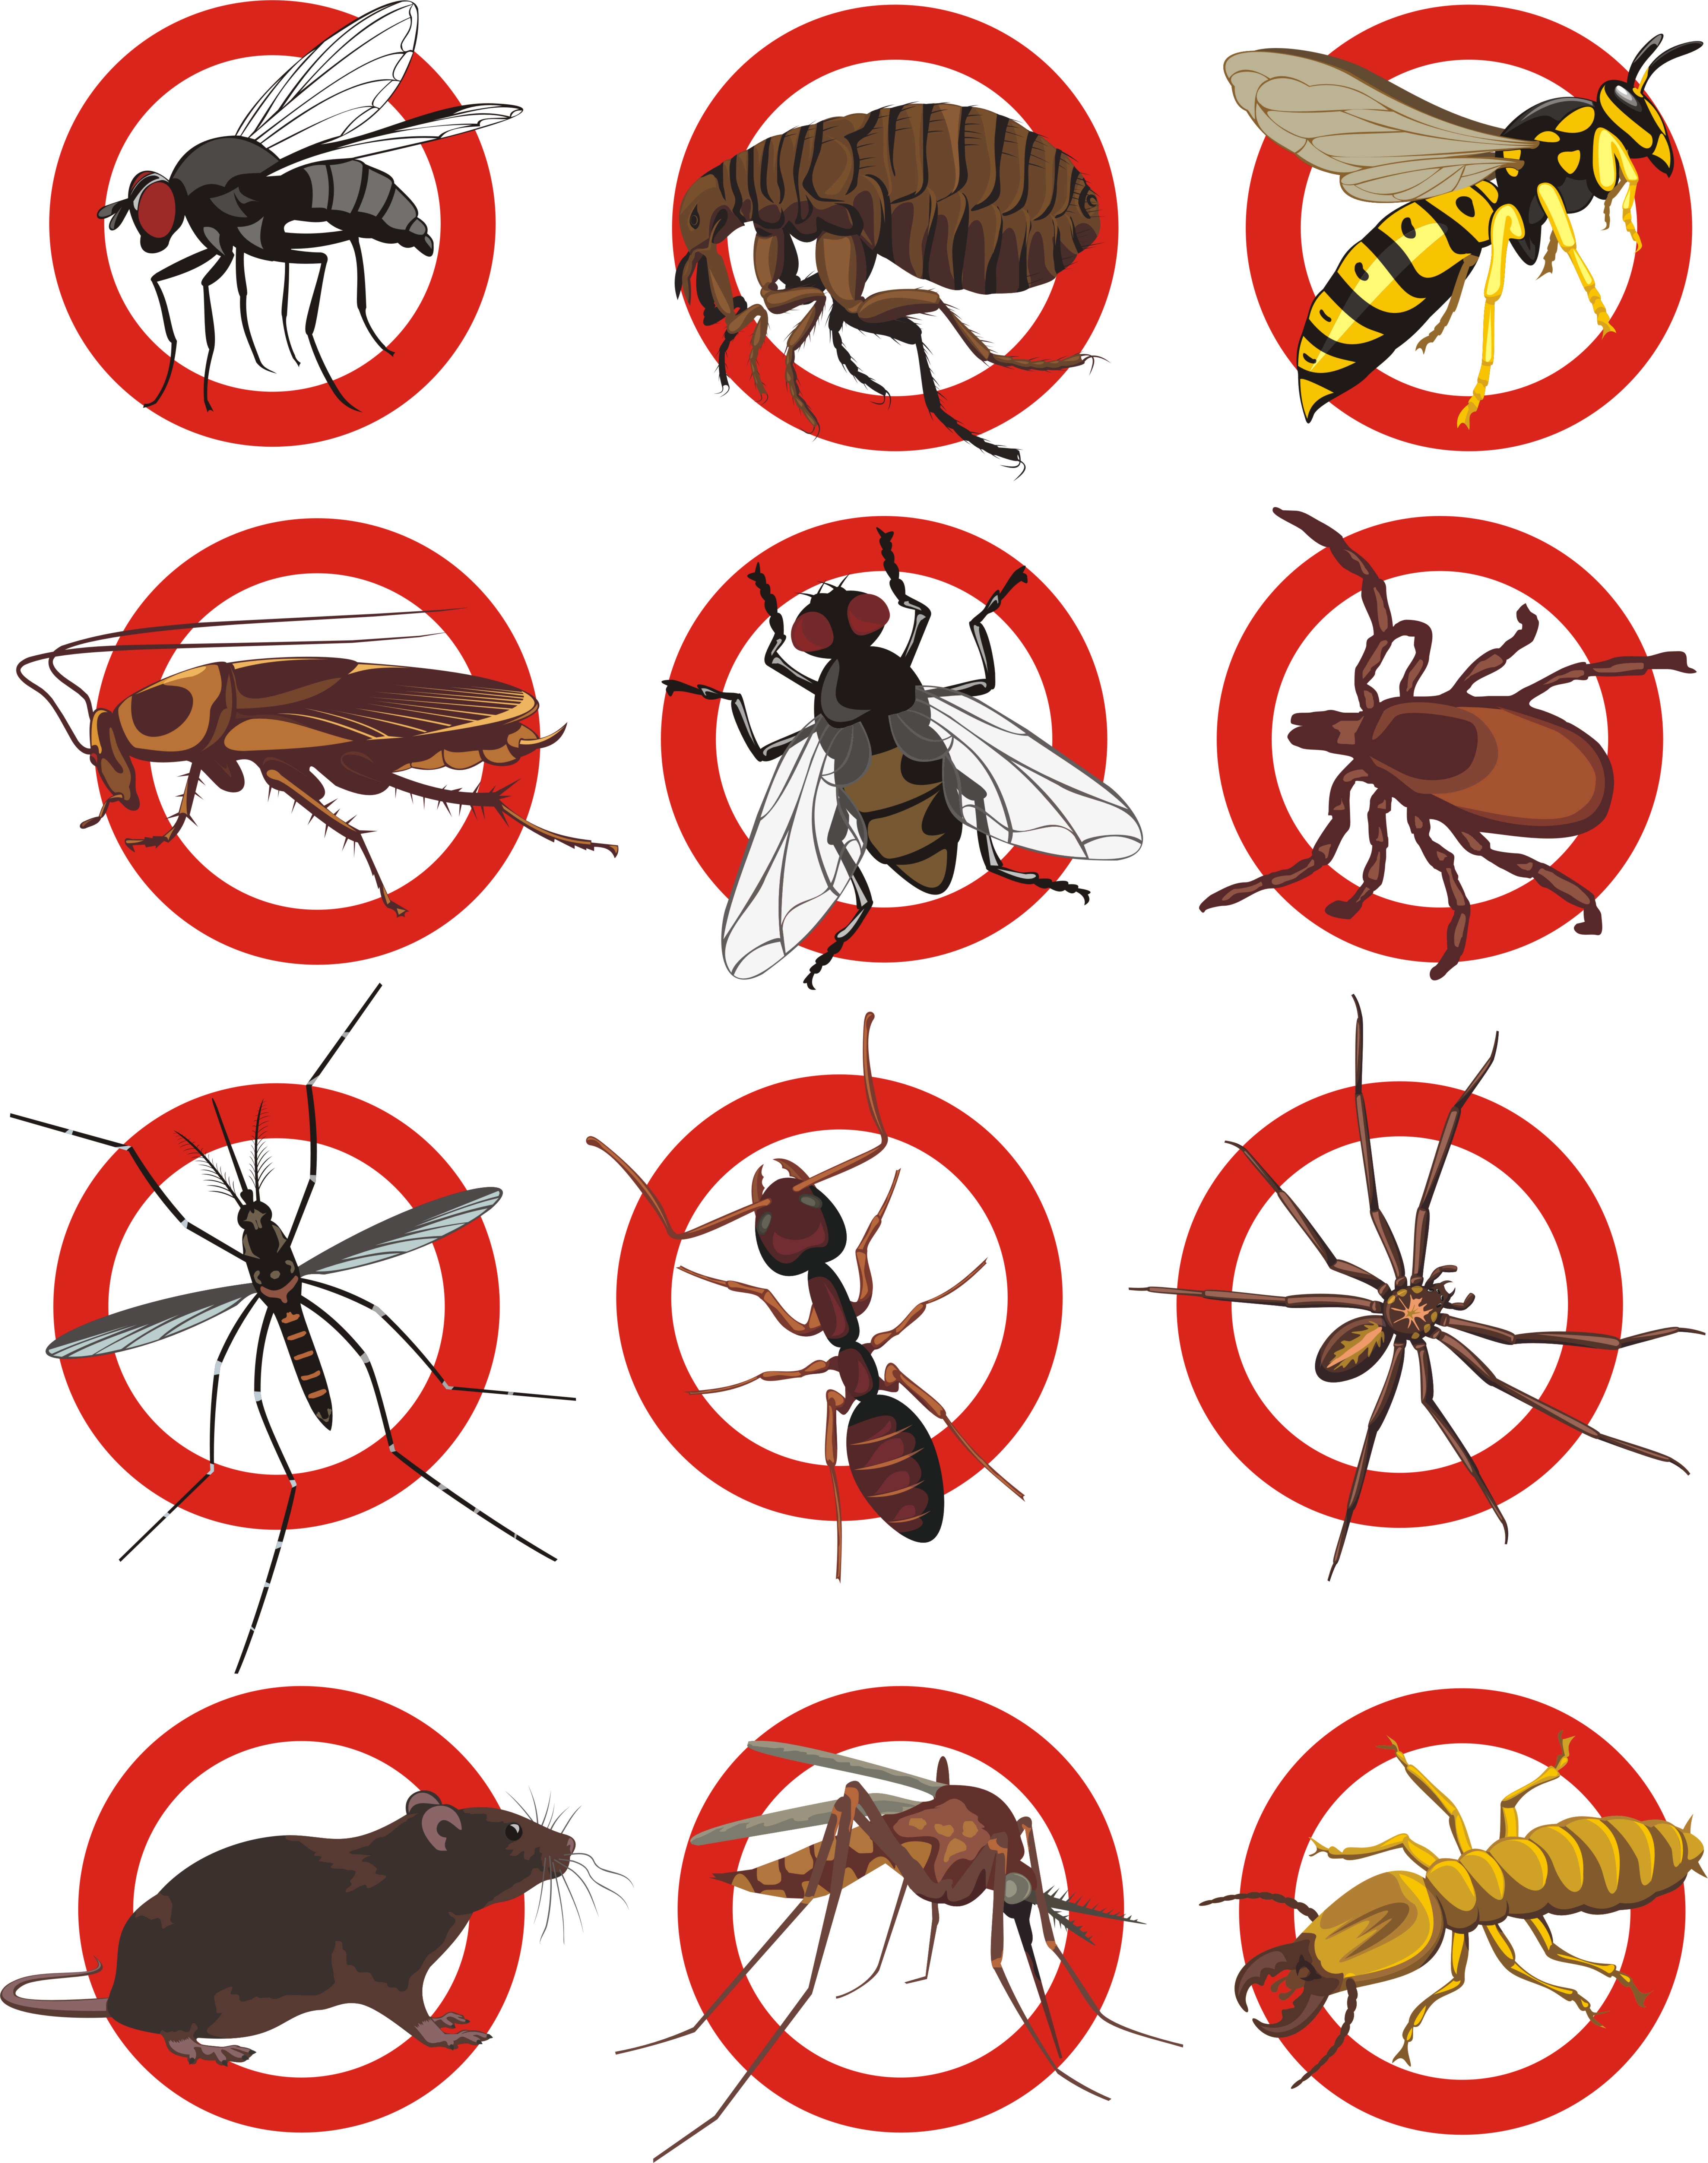 Assortment of bugs in red target circles